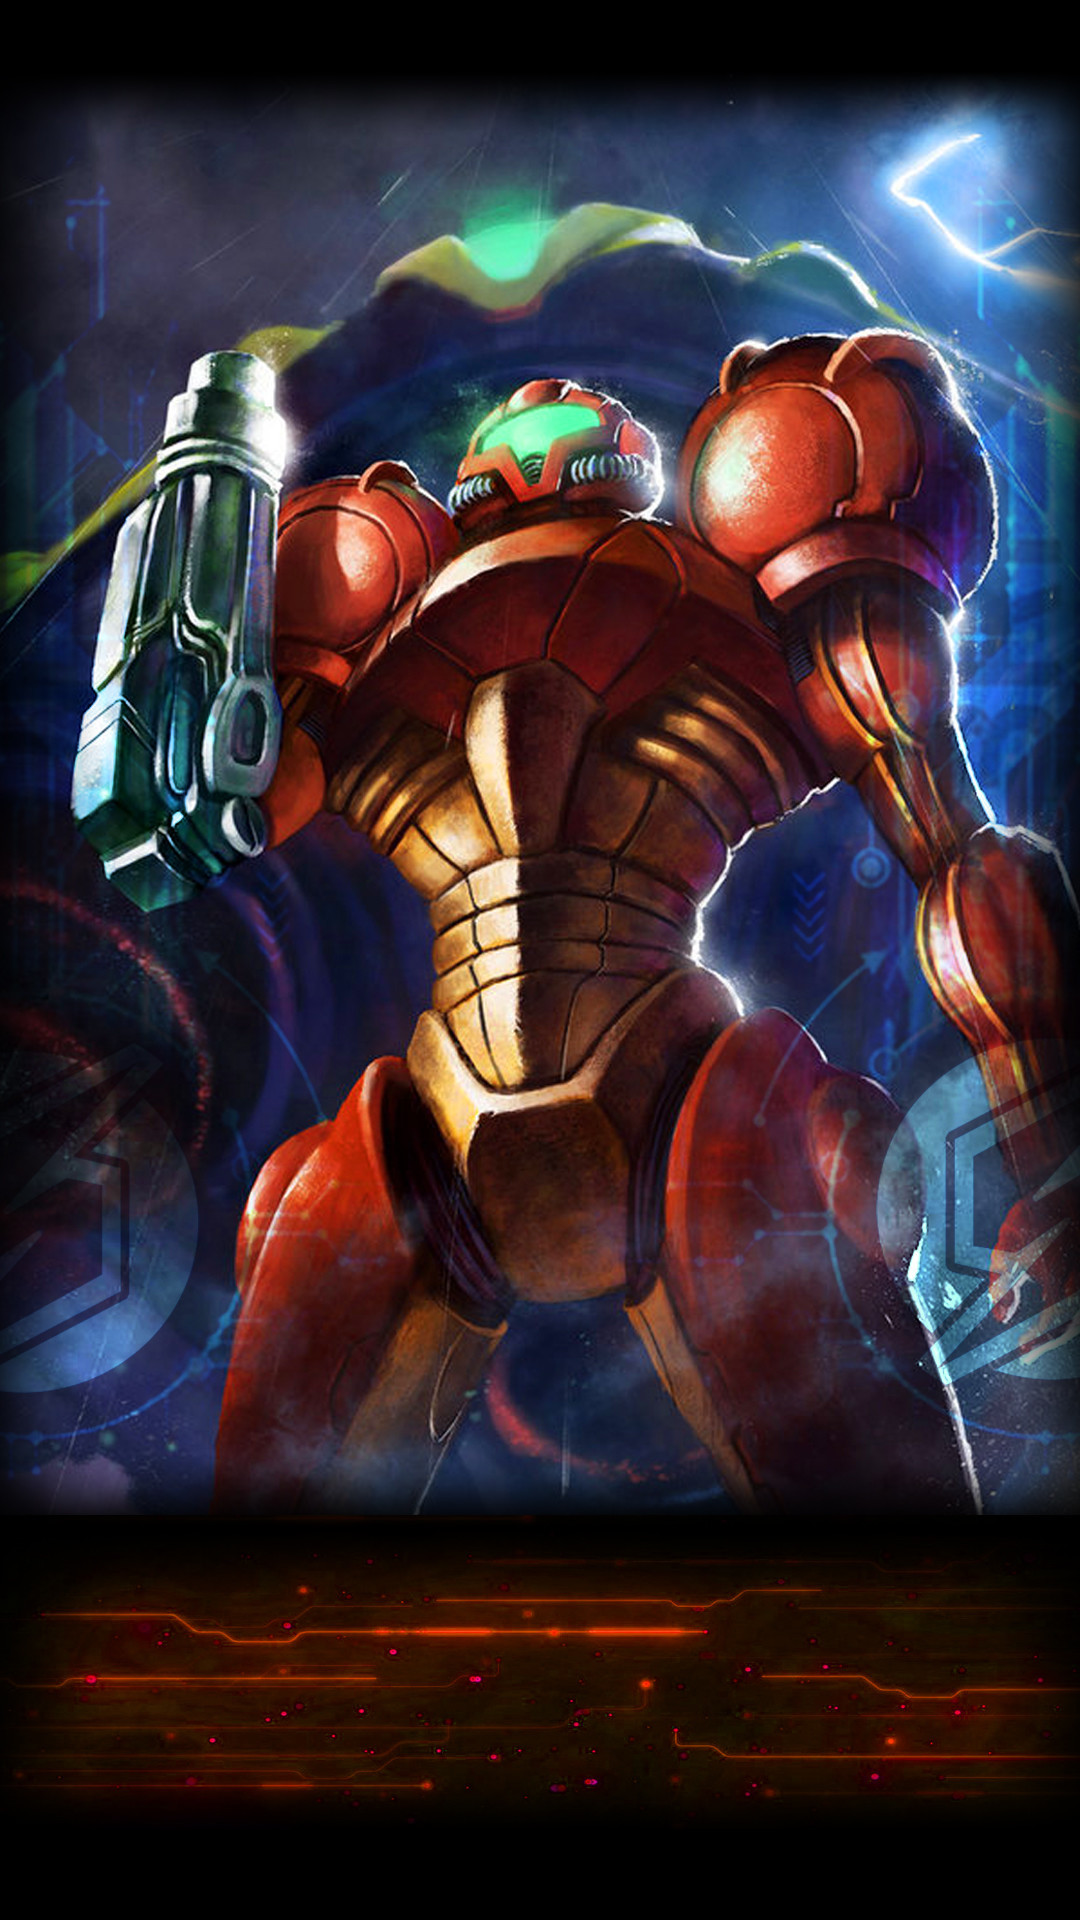 1080x1920  Metroid mobile phone wallpaper I did with some photoshop.